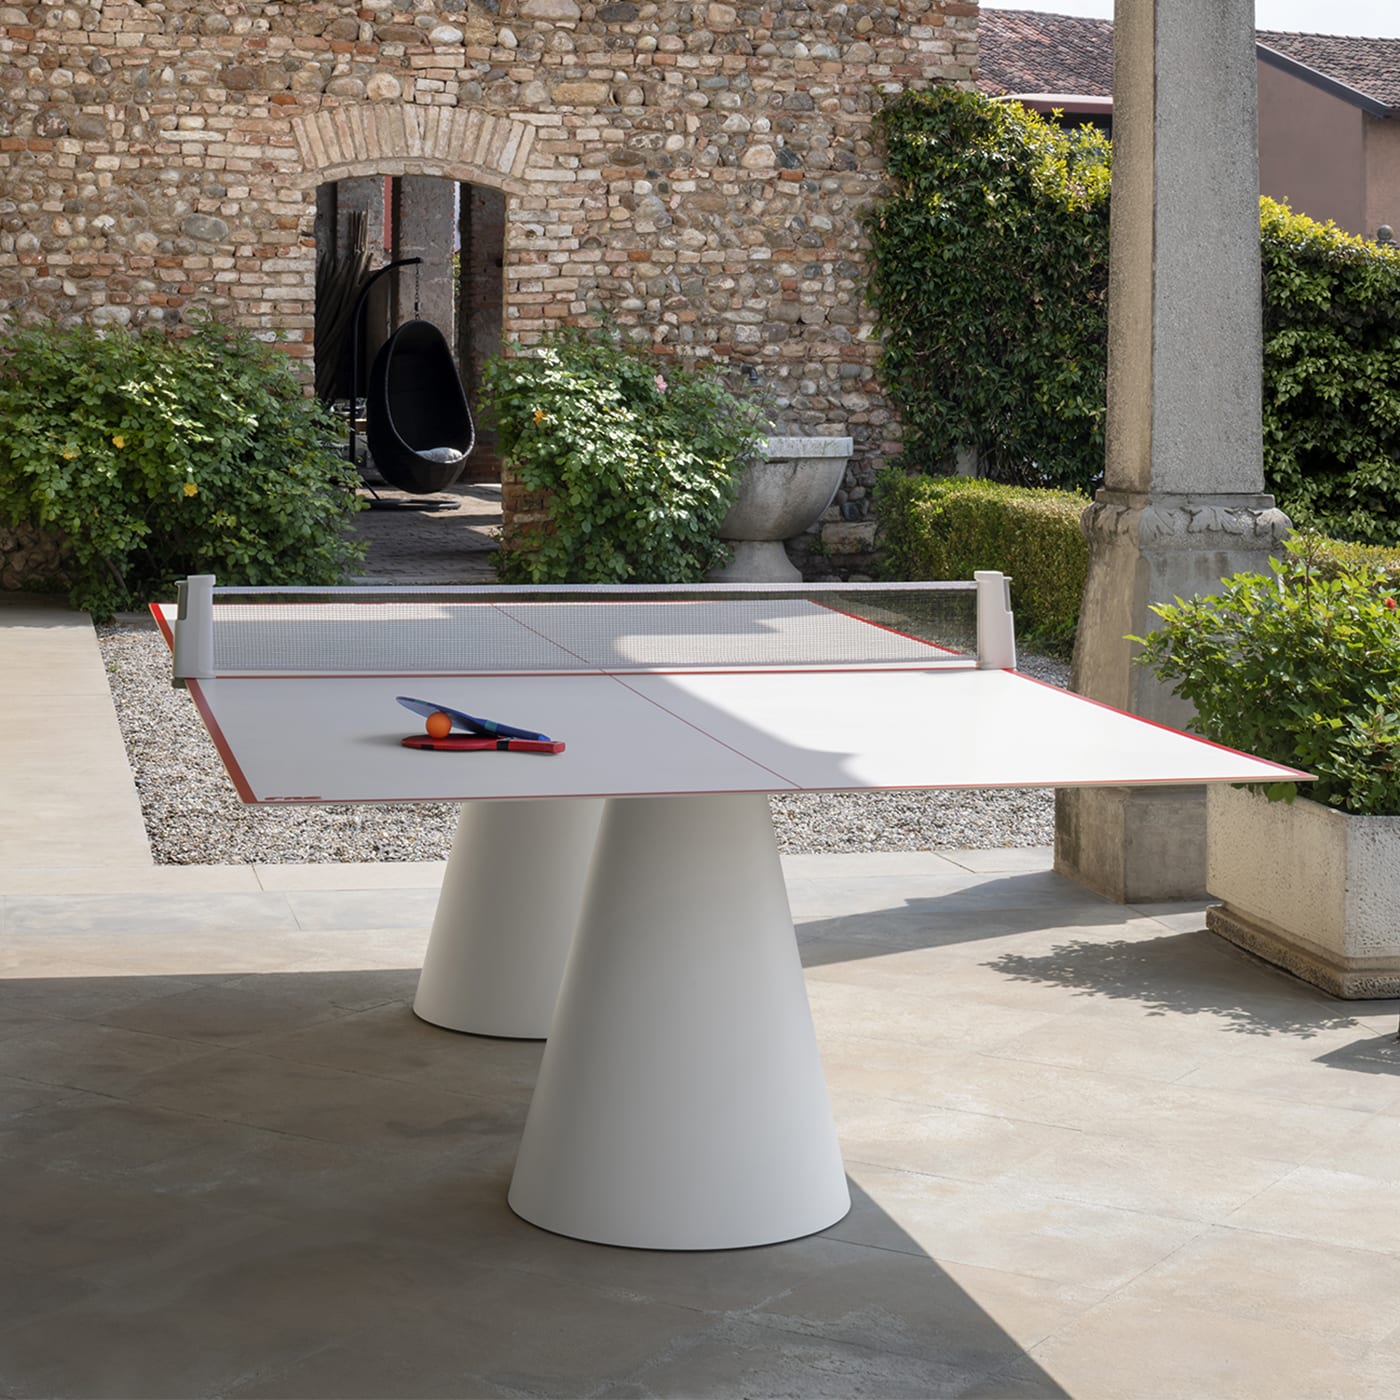 GRASSHOPPER OUTDOOR Rectangular Ping pong table By FAS Pendezza